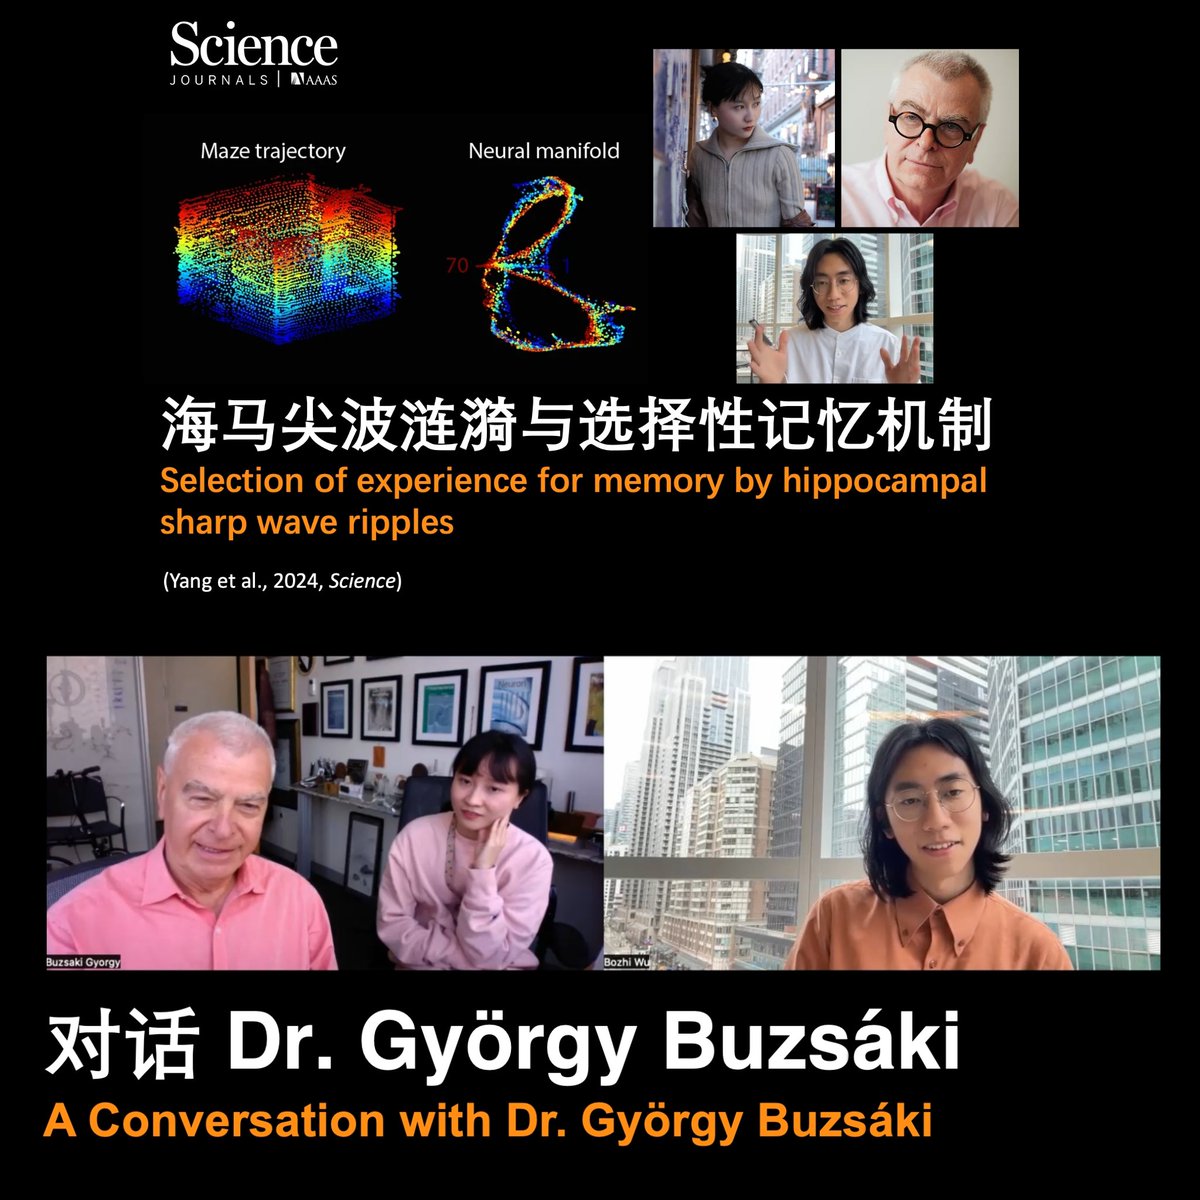 It's my great honor to have the opportunity to have @winnieyangwn to give a talk on her new @ScienceMagazine paper on my Bilibili channel (Chinese YouTube)! b23.tv/qzVI5Sz